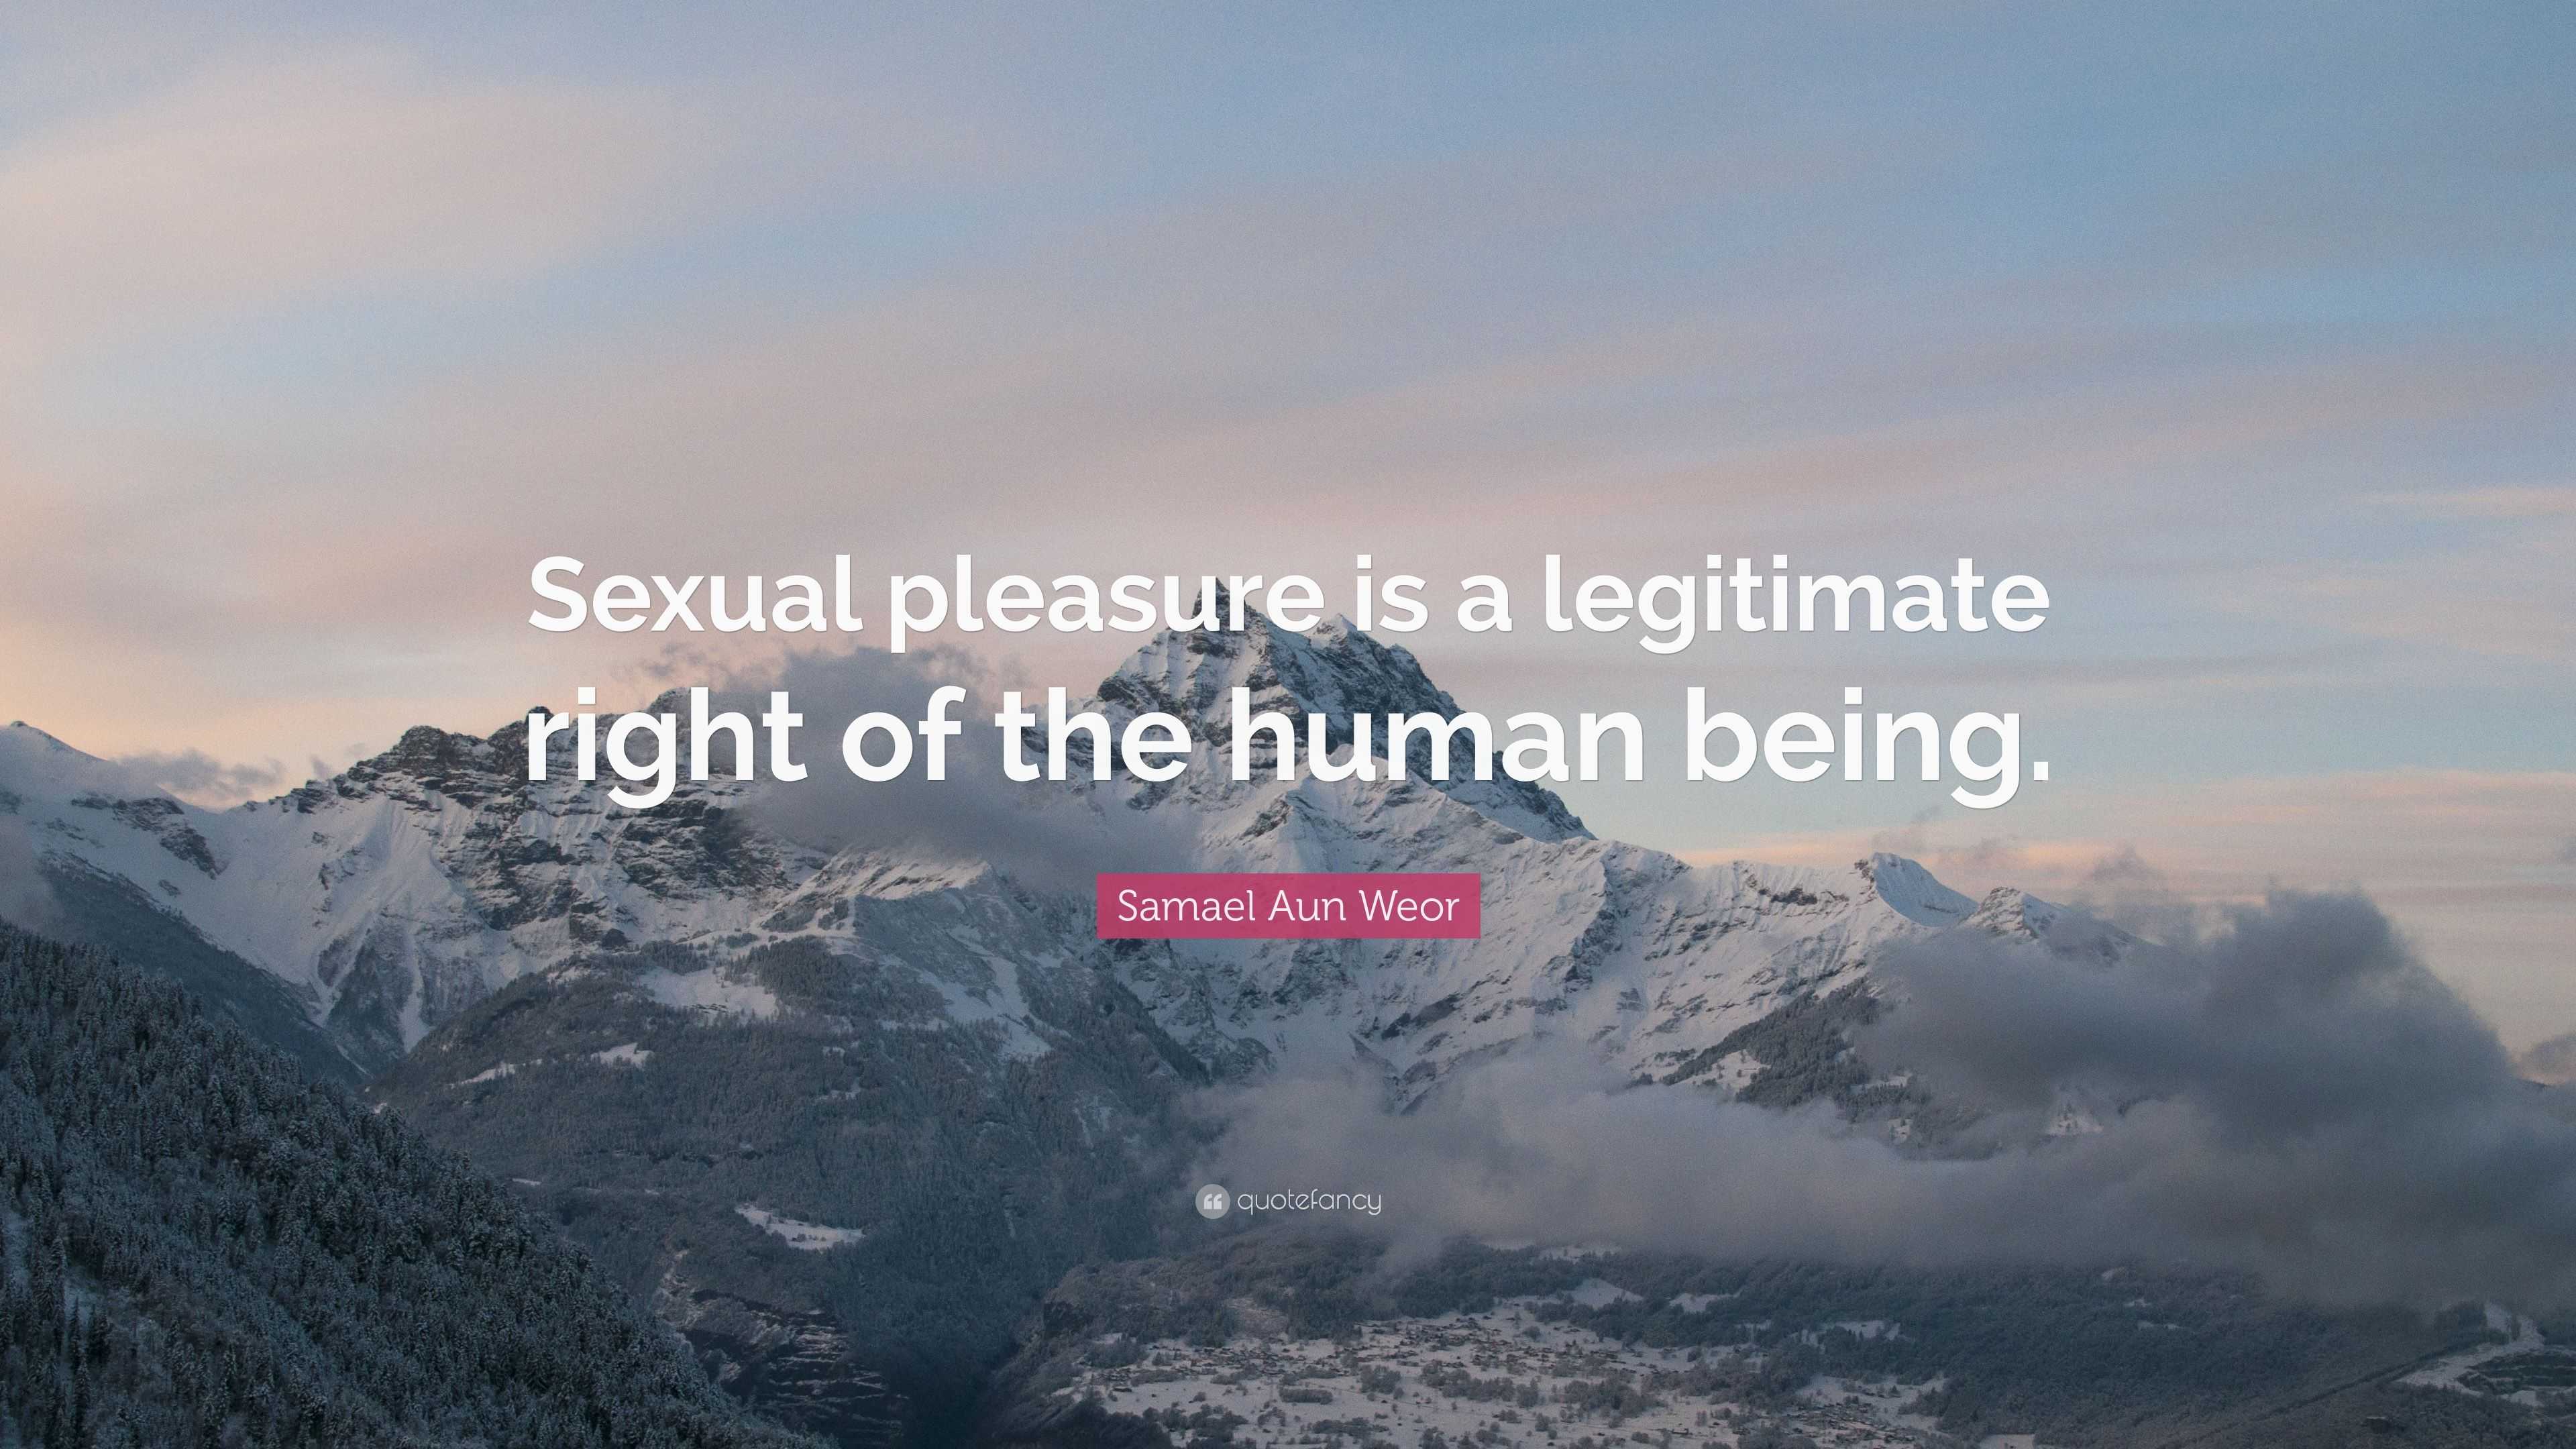 Self-pleasure is a human right too.